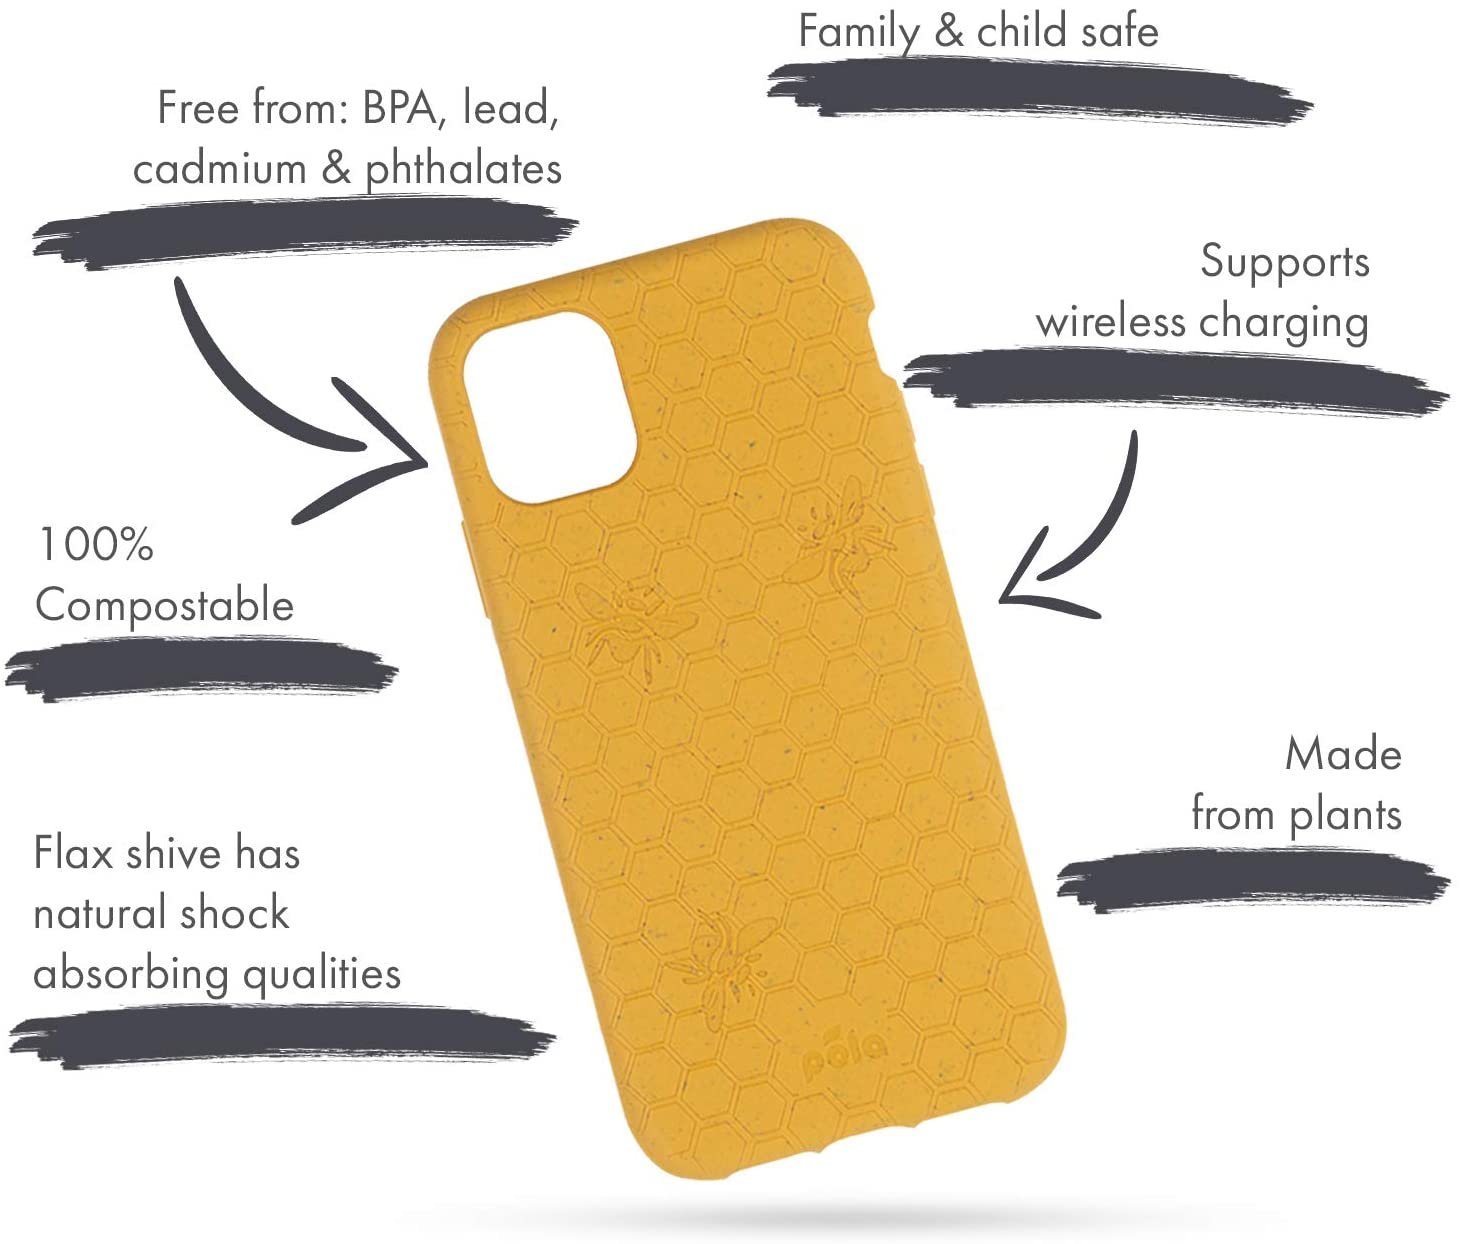 Pela: Phone Case for iPhone 12 Pro Max - 100% Compostable and Biodegradable - Eco-Friendly - Made from Plants (Classic Honey Bee) - e4cents